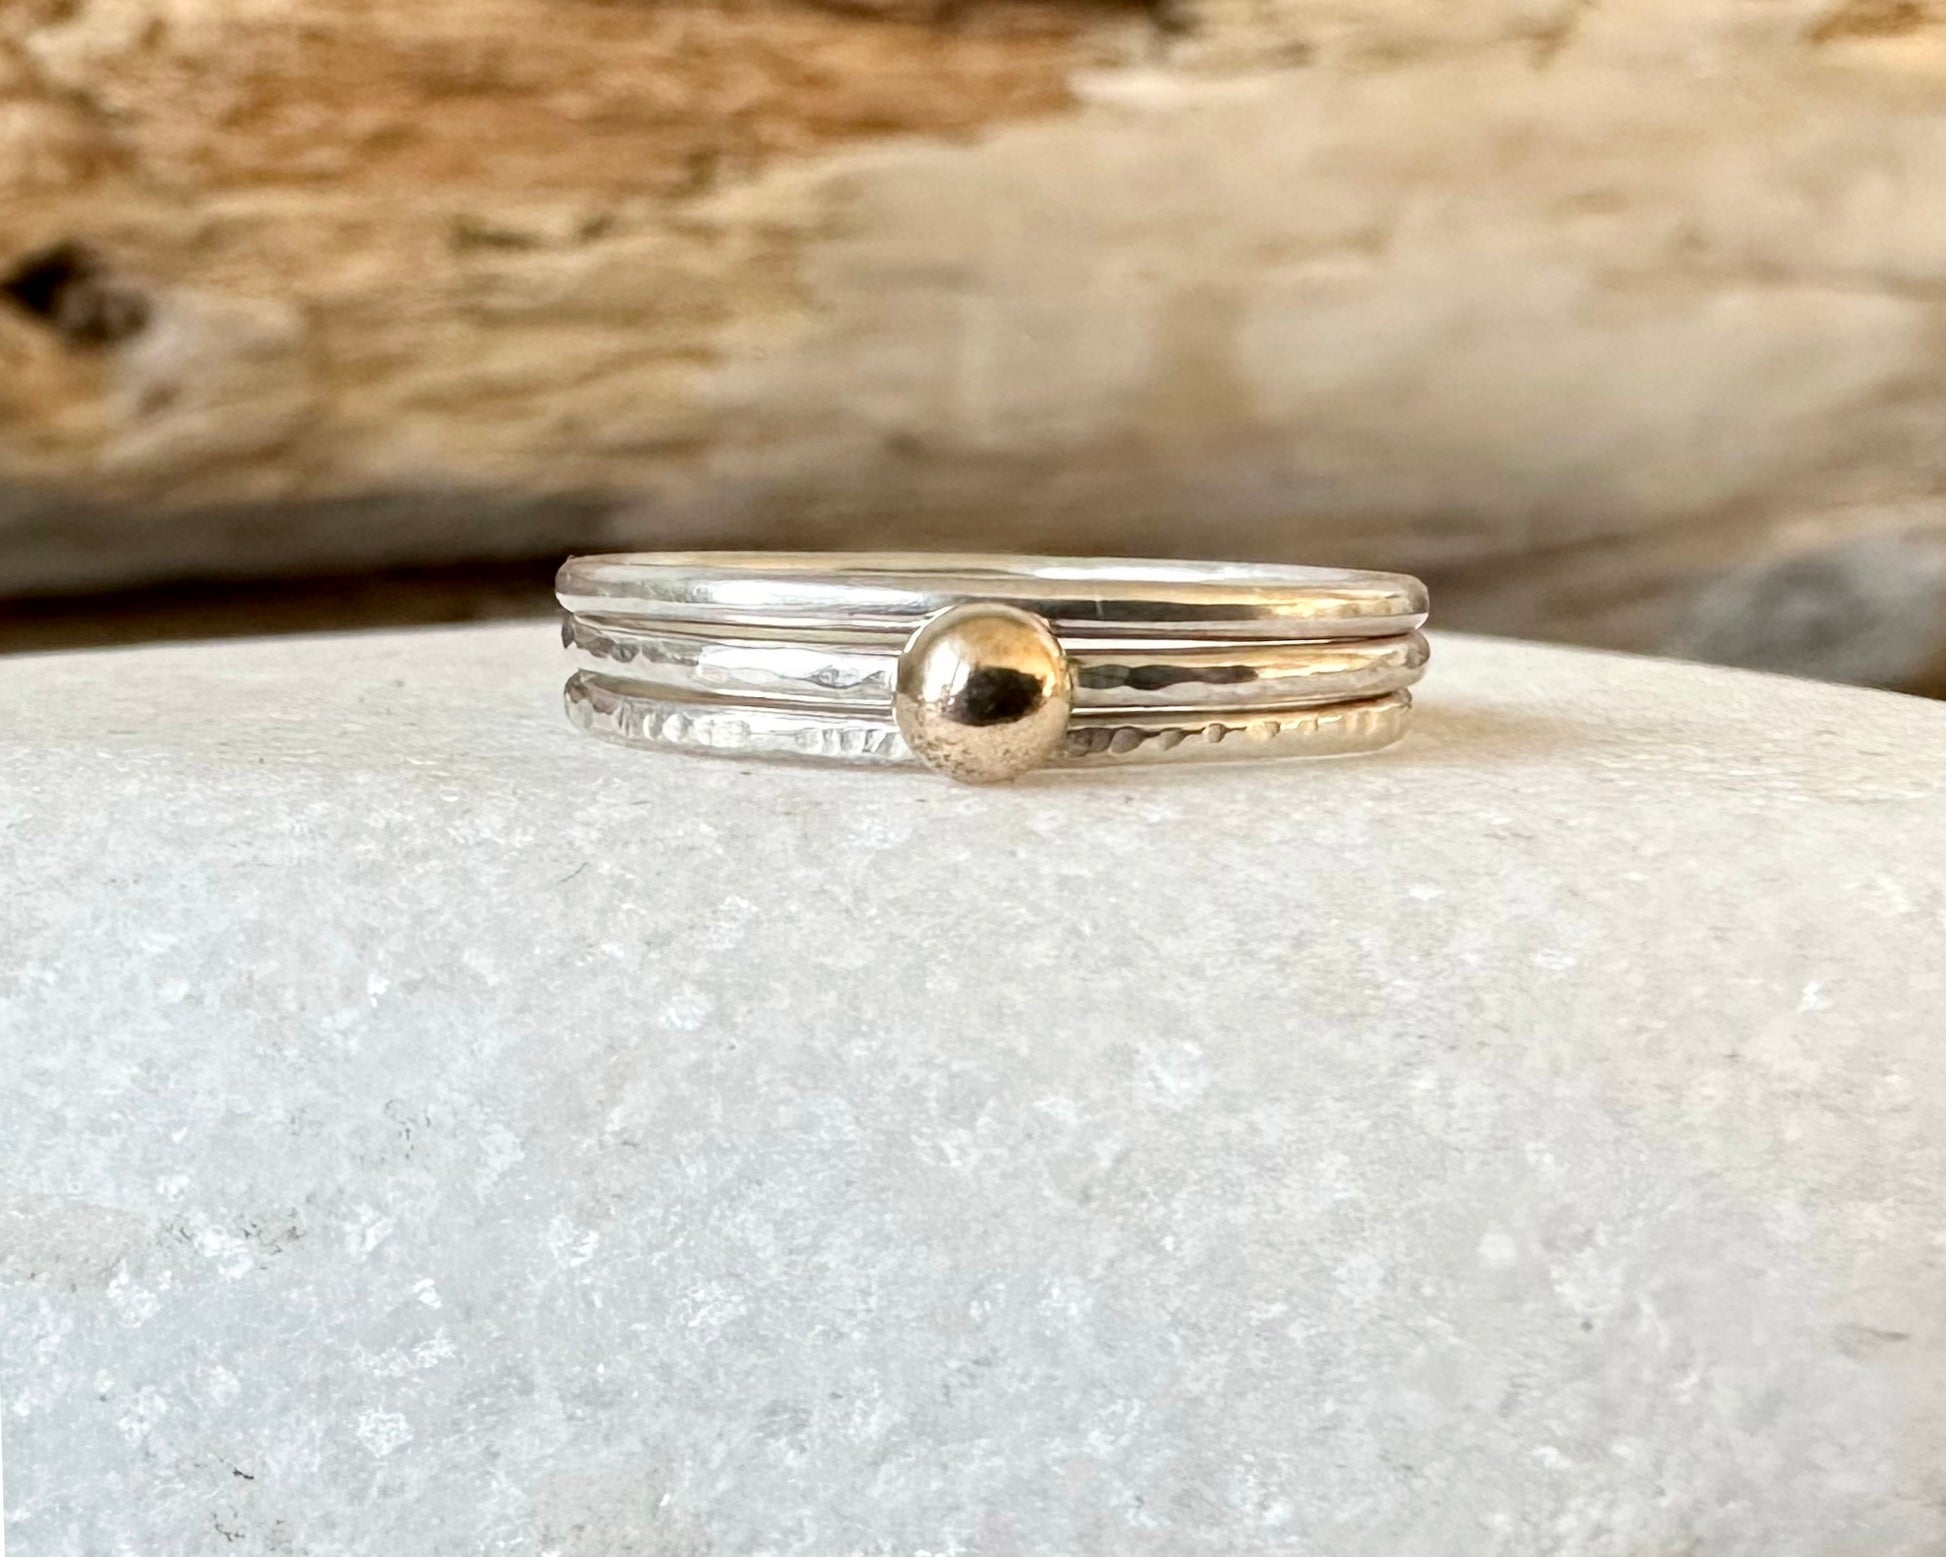 Gold Nugget on 1.2mm 925 sterling Silver Stacking Ring Set, Recycled Gold and Sterling Silver 1.2mm Skinny Minimalist Rings